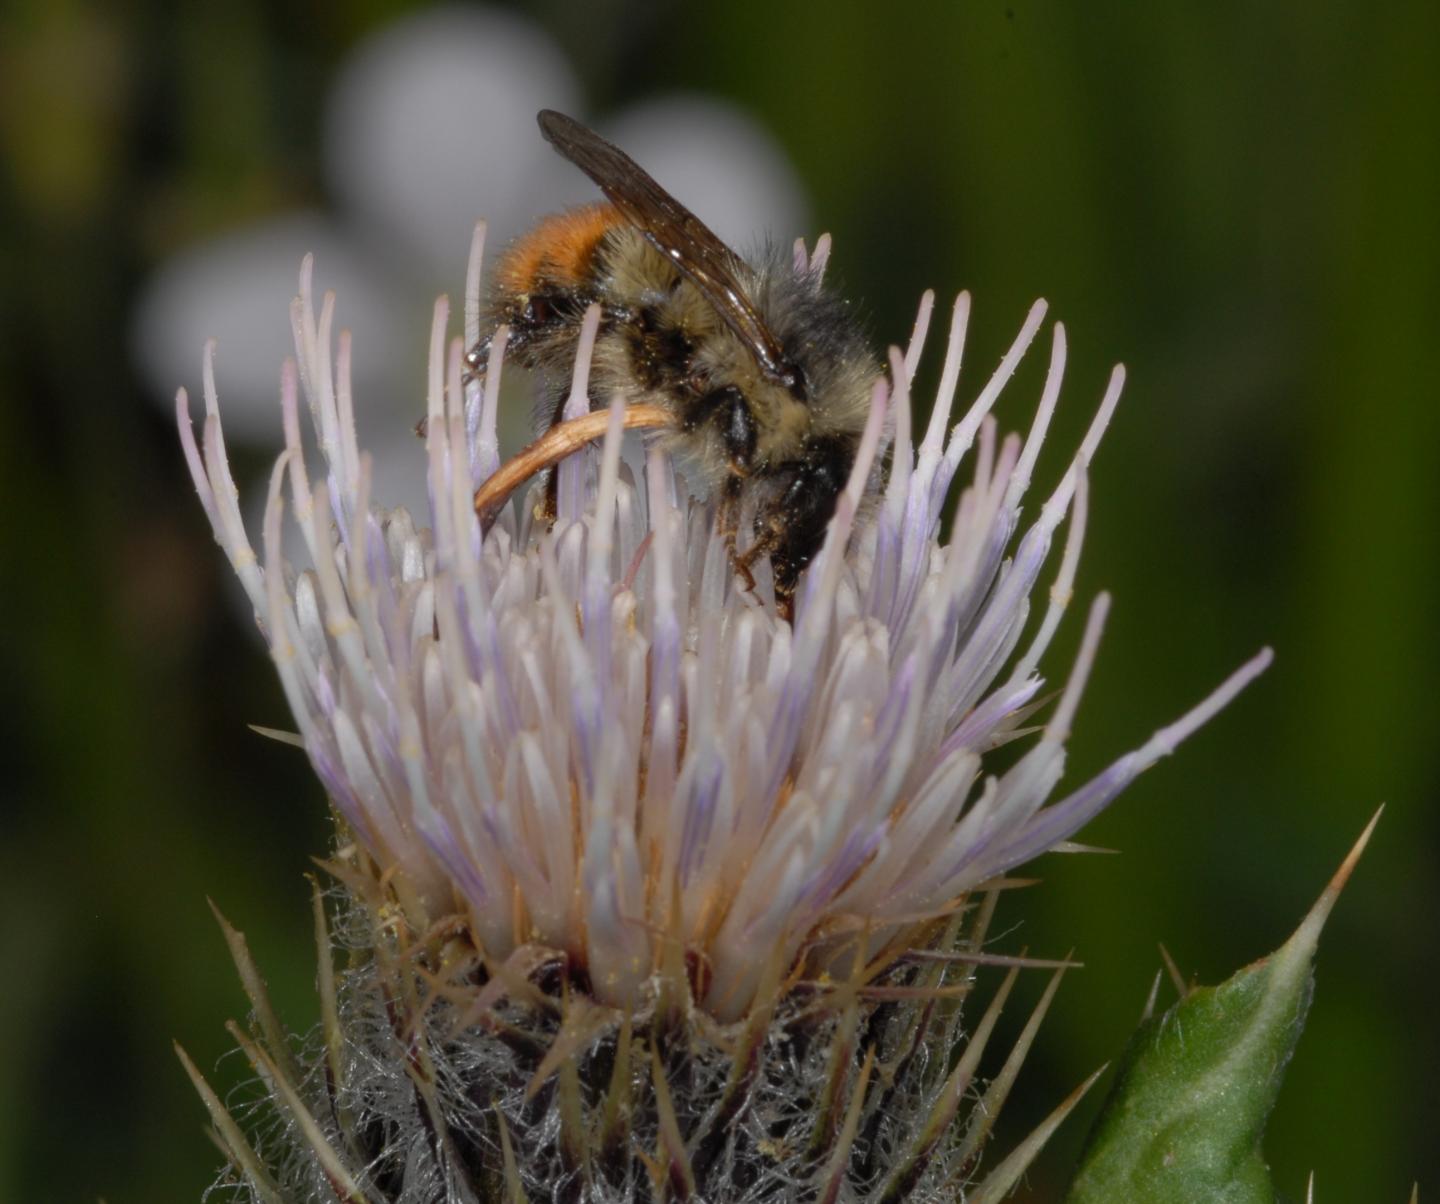 Bumble Bee on a Thistle Flower